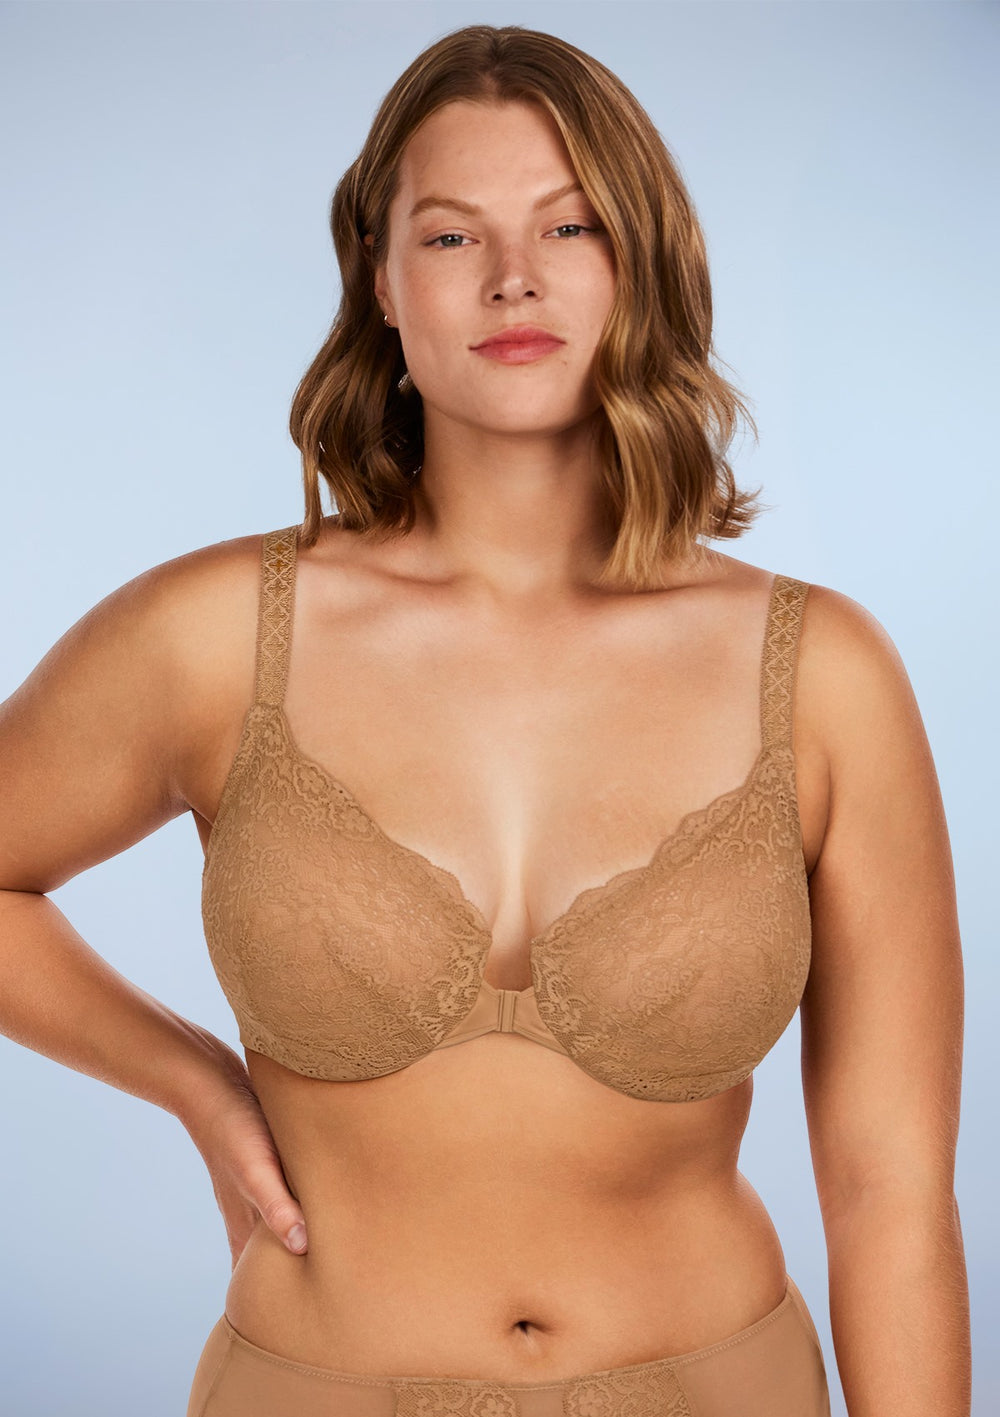 I wear a 38H bra - I got some great bras for big boobs from ASOS including  a lacy one on sale for $20